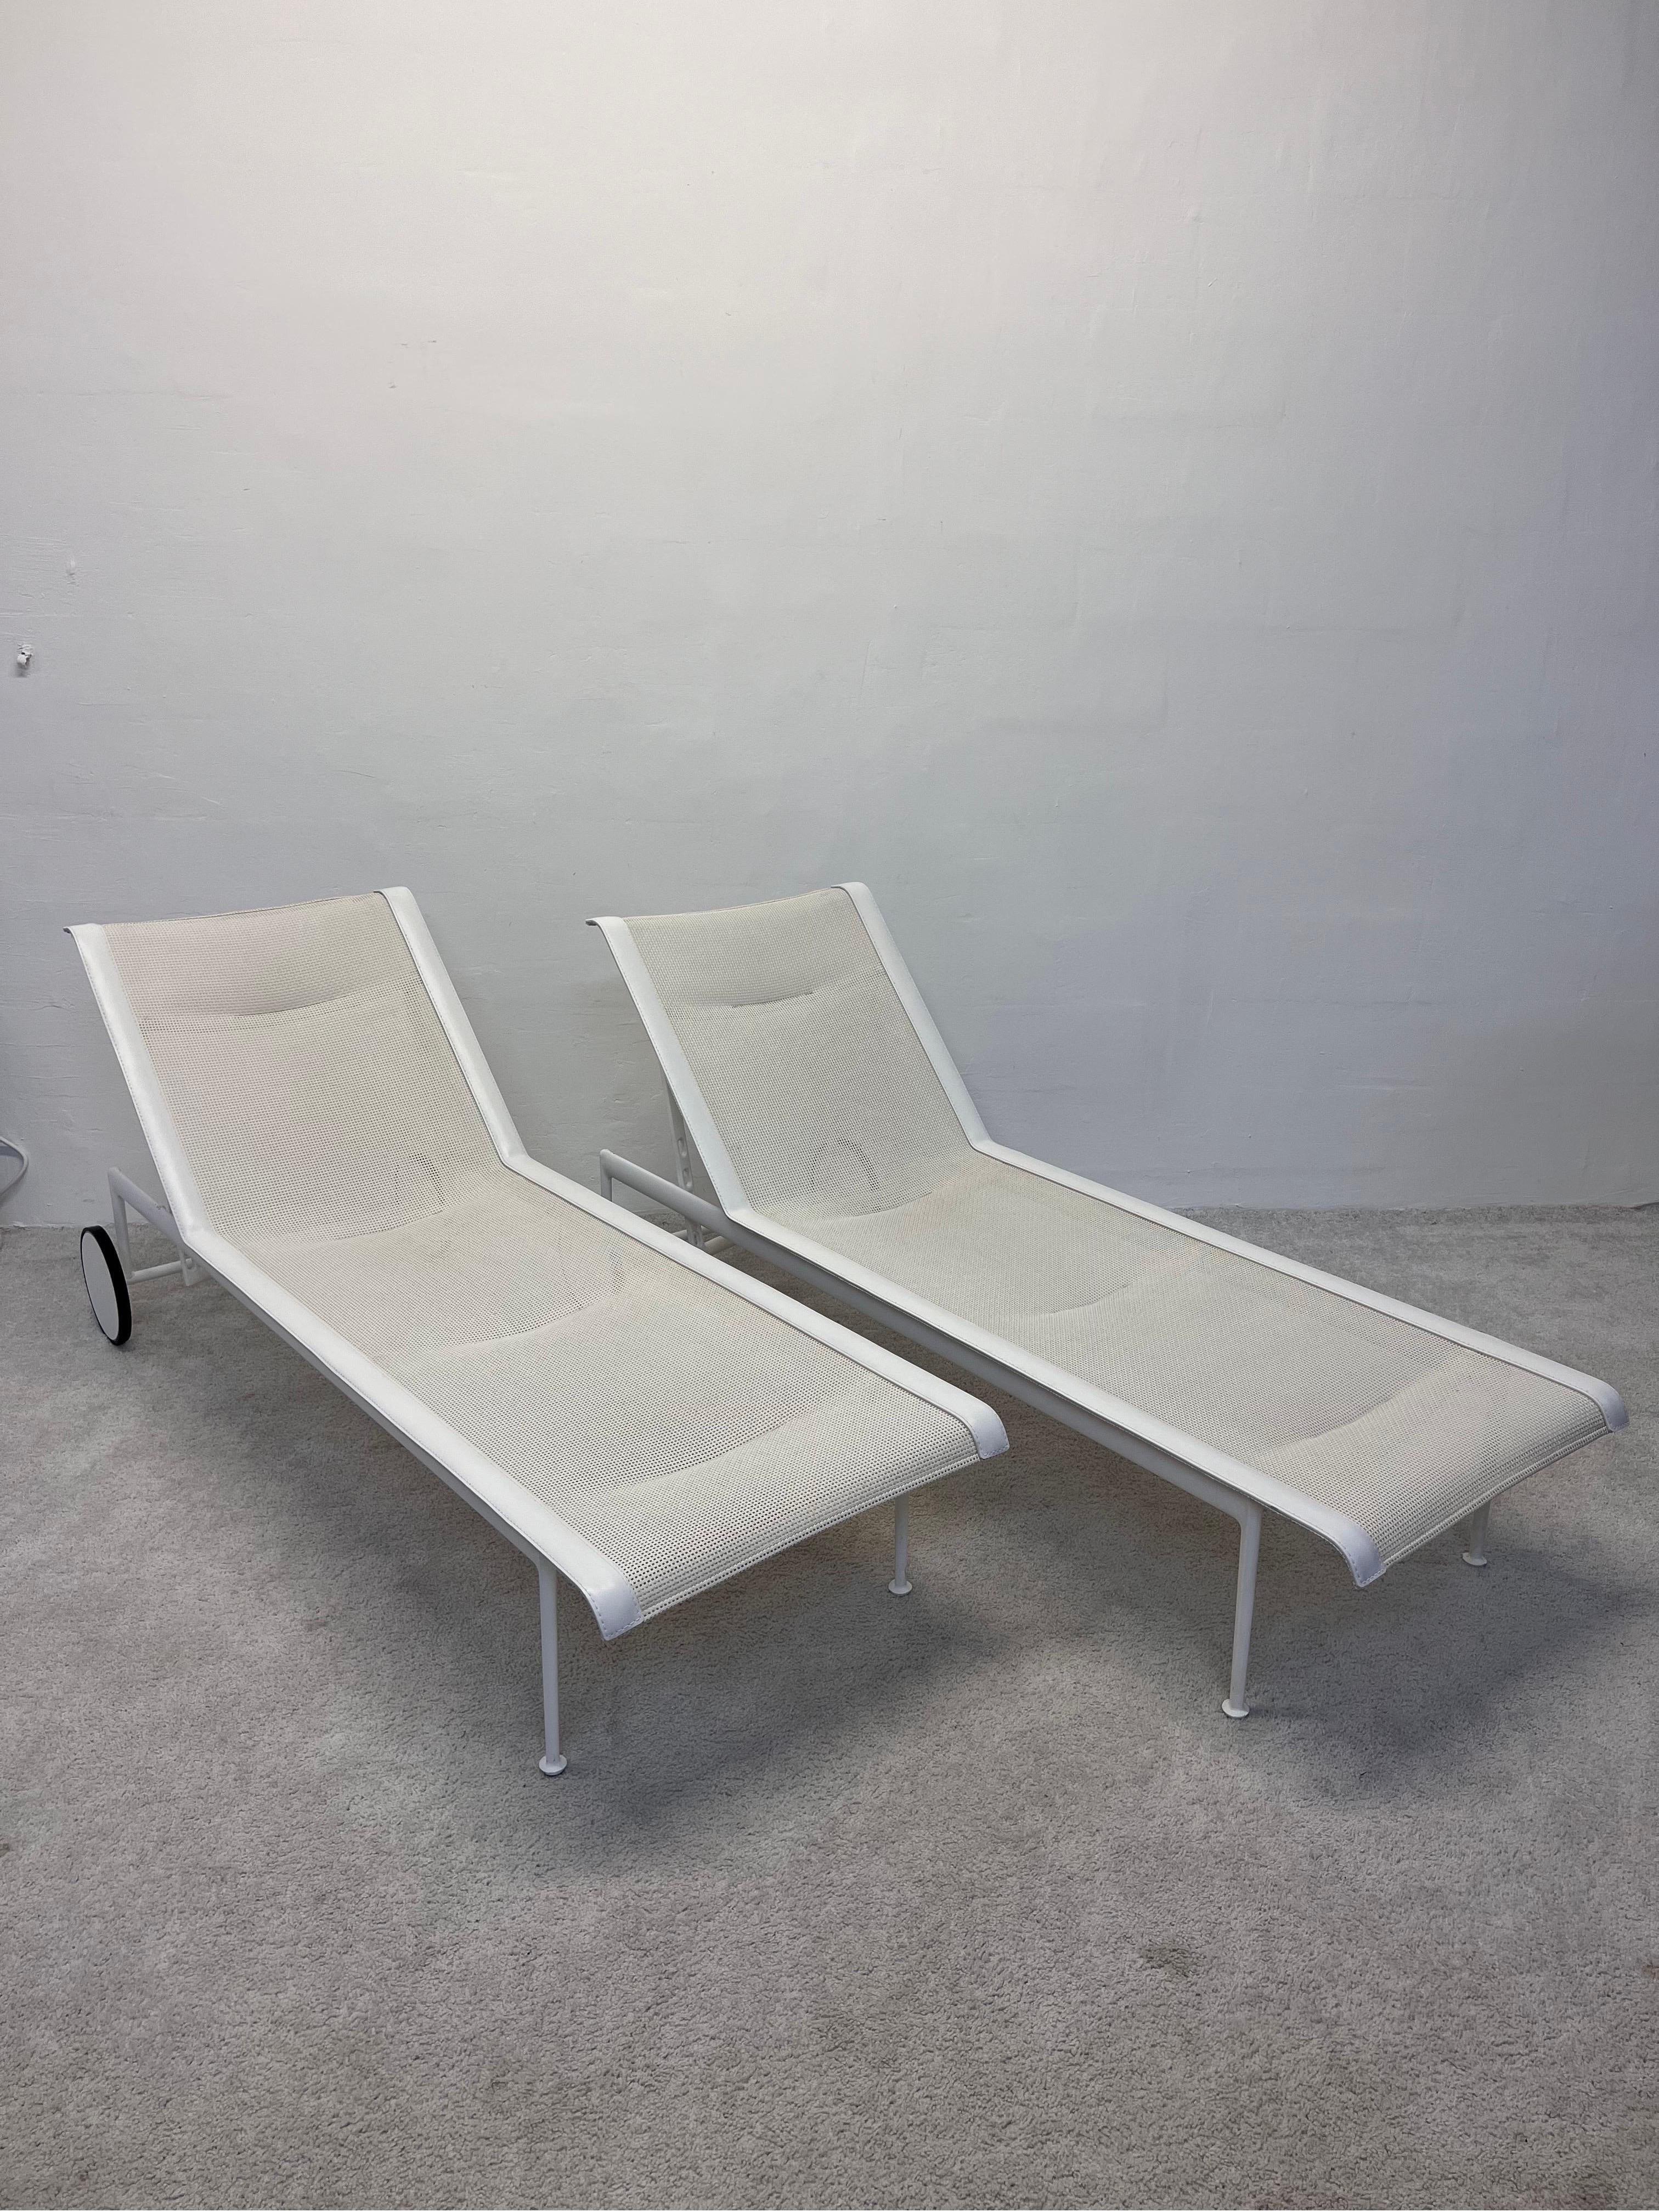 Pair of adjustable 1966 chaise lounges with vinyl mesh fabric and white vinyl stitched edge on a white powder coated aluminum frame originally designed by Richard Schultz for Knoll. These were produced circa early 2000s.